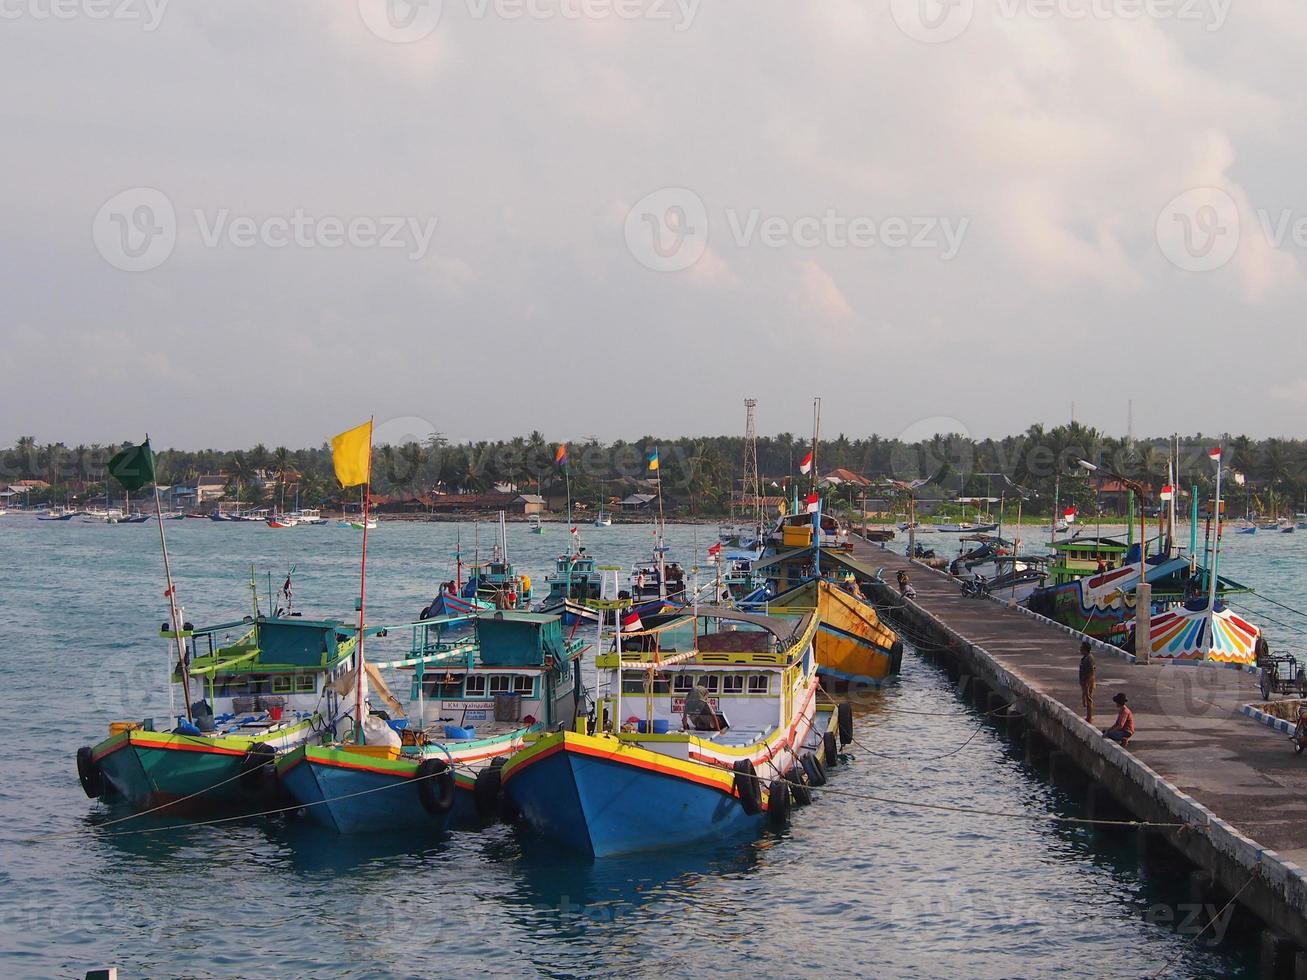 Traditional harbor in the morning with several fishing boats alongside and people activities at Masalembu Island, Indonesia. January 2020, Masalembu - Indonesia photo